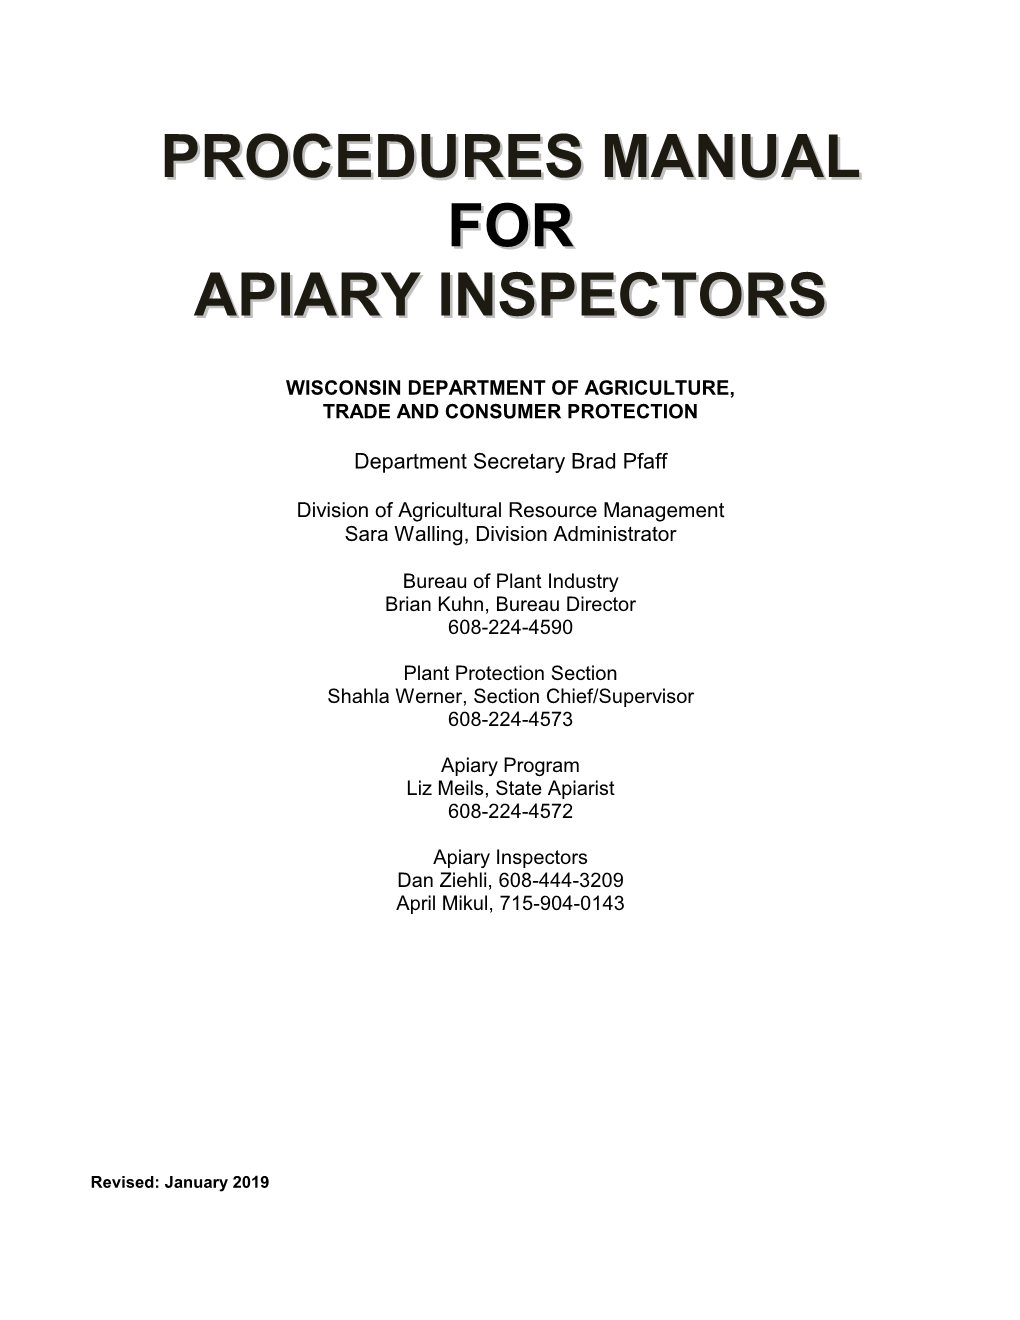 Procedures Manual for Apiary Inspectors